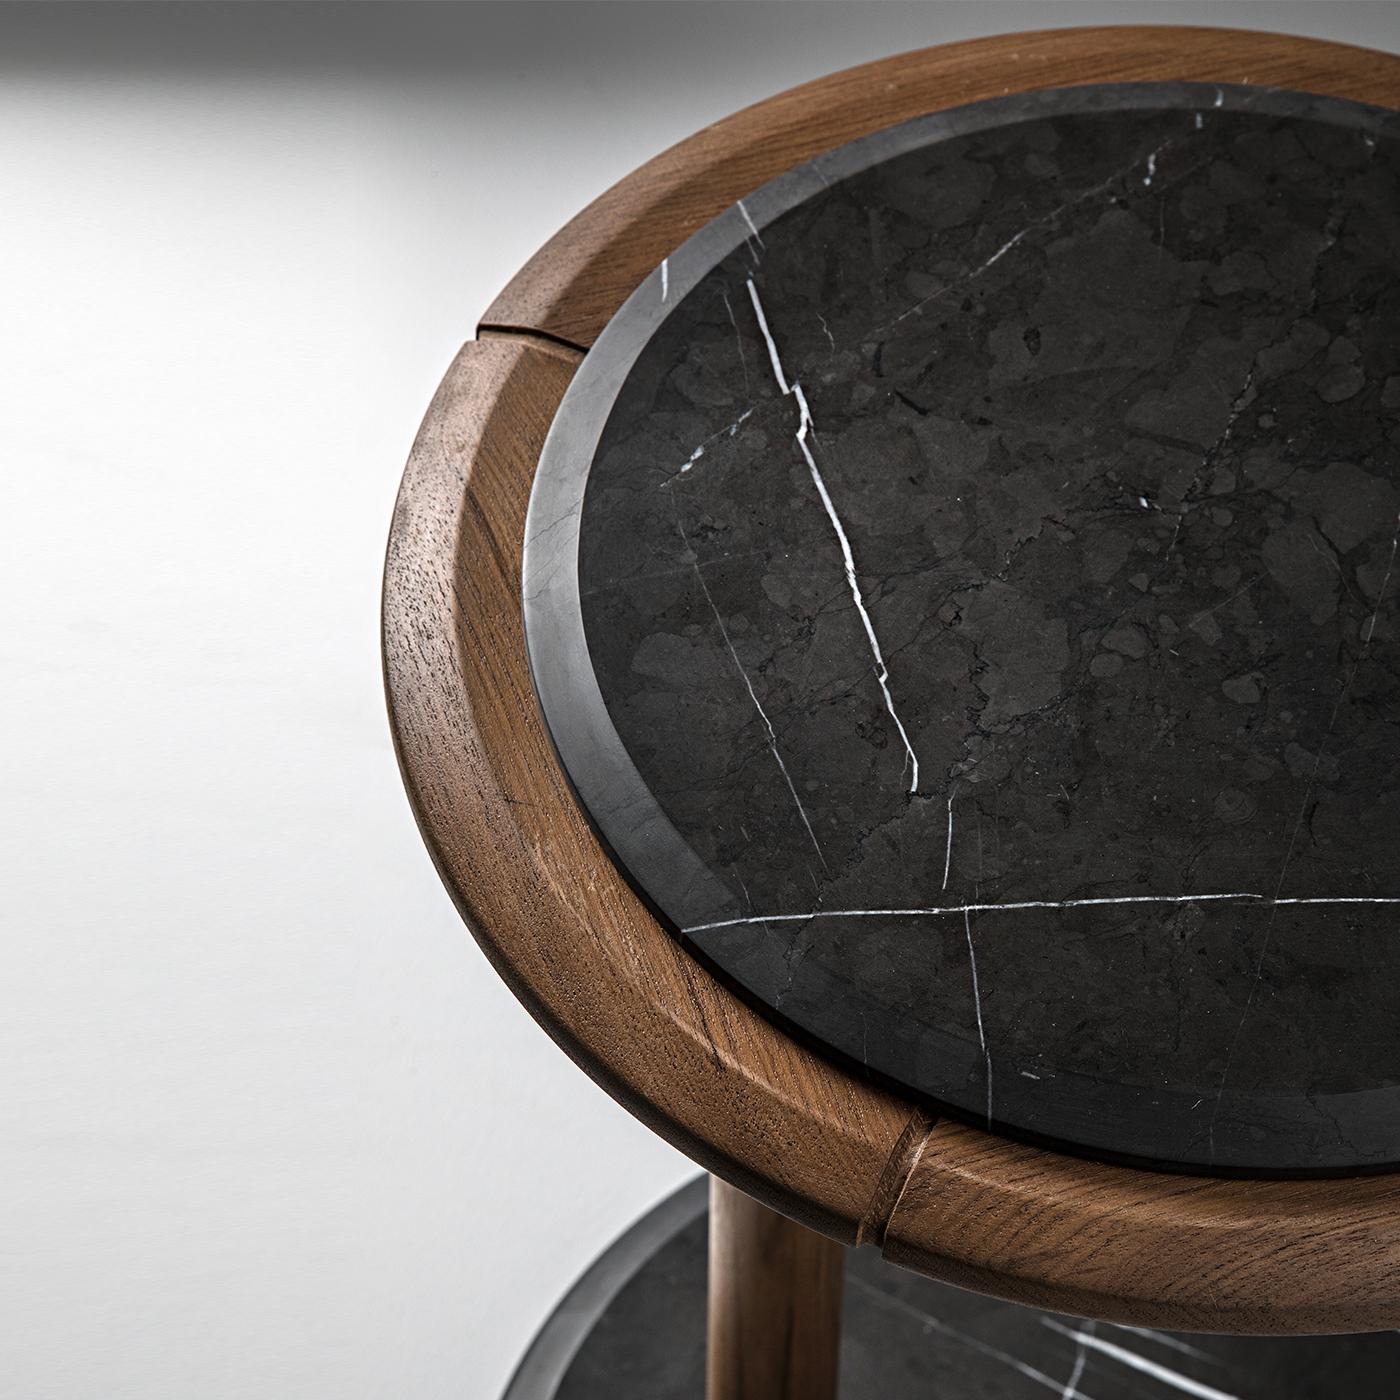 The durability and timeless charm of materials such as teak and black marble defines the elegant character infusing this round side table. Featuring structural details in nautical stainless steel, the design stands out for its asymmetrical profile